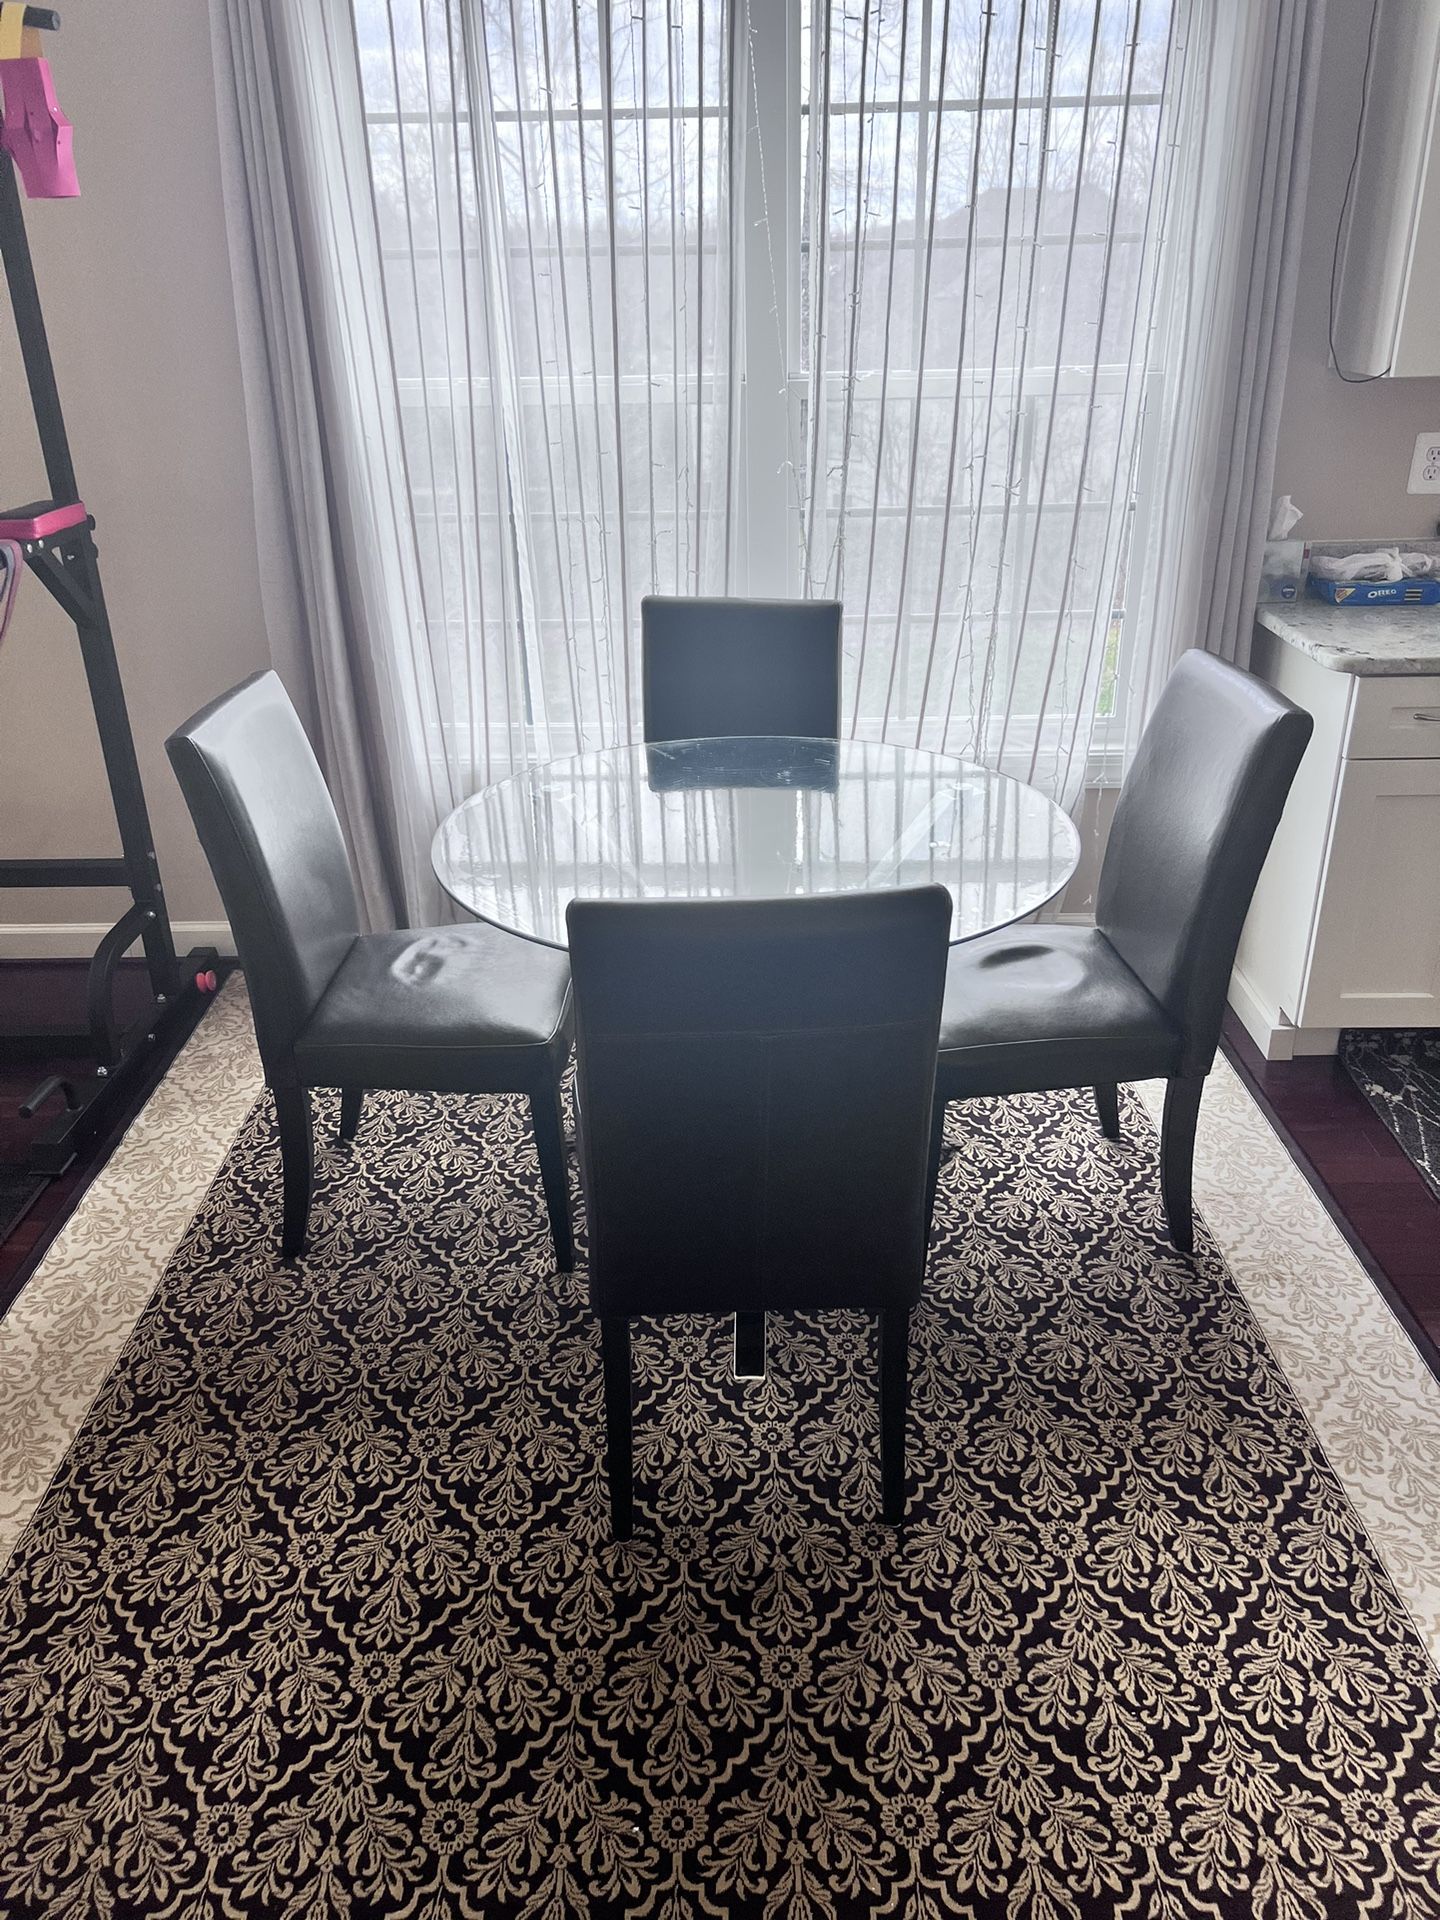 Glass Dining Table With Chairs